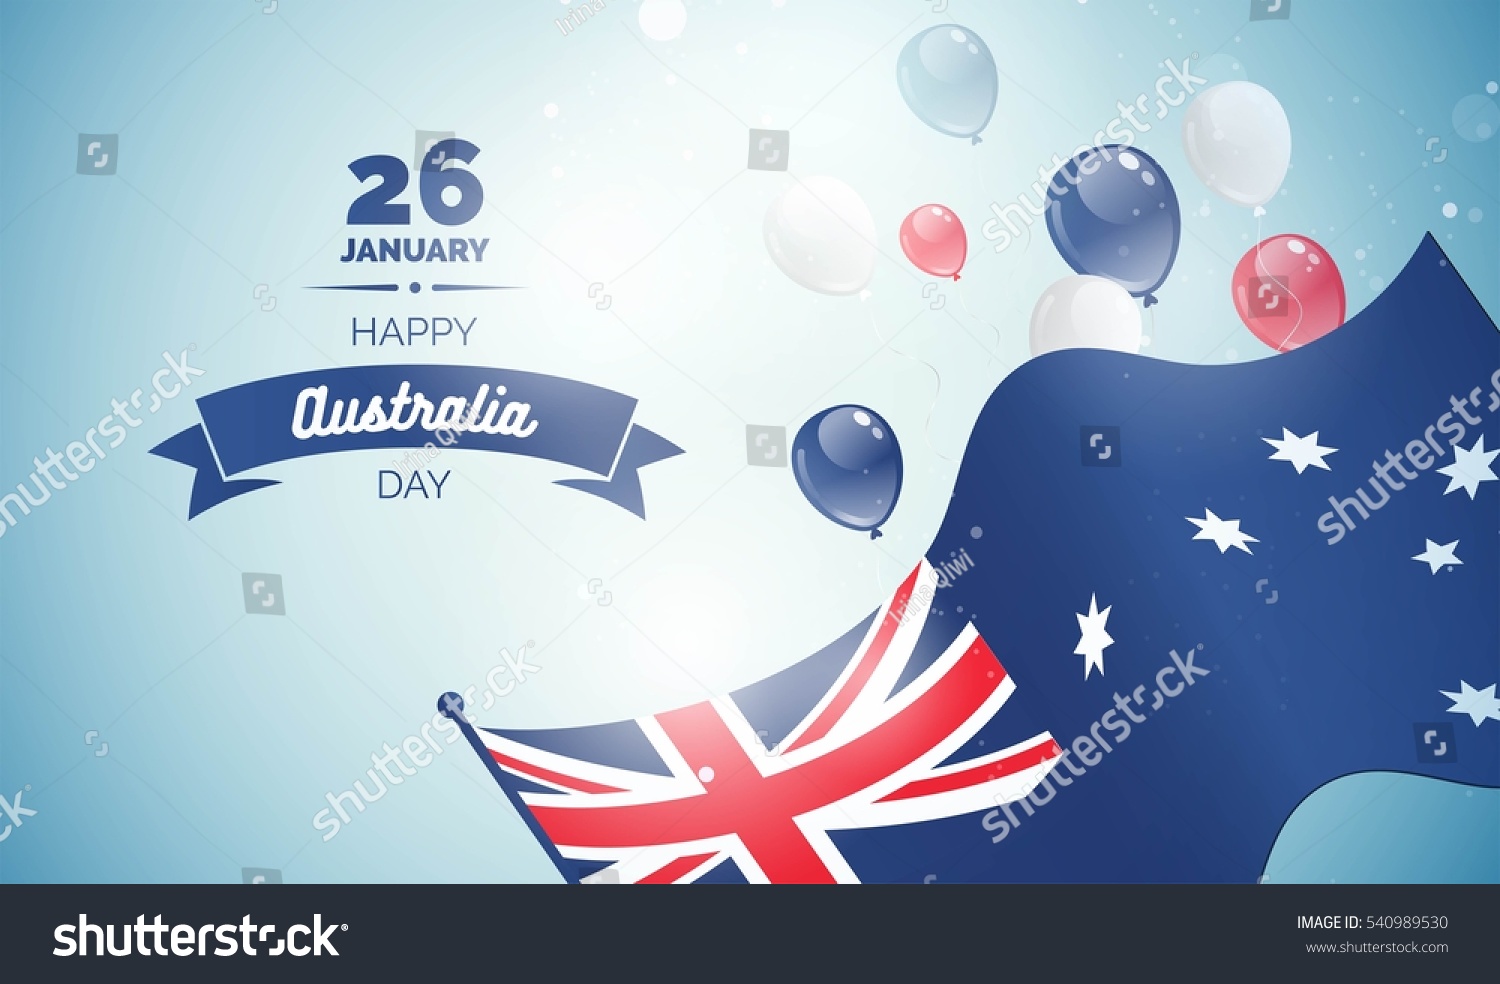 SVG of 26 january. Australia Day greeting card. Celebration background with flying balloons and waving flag. Vector illustration svg